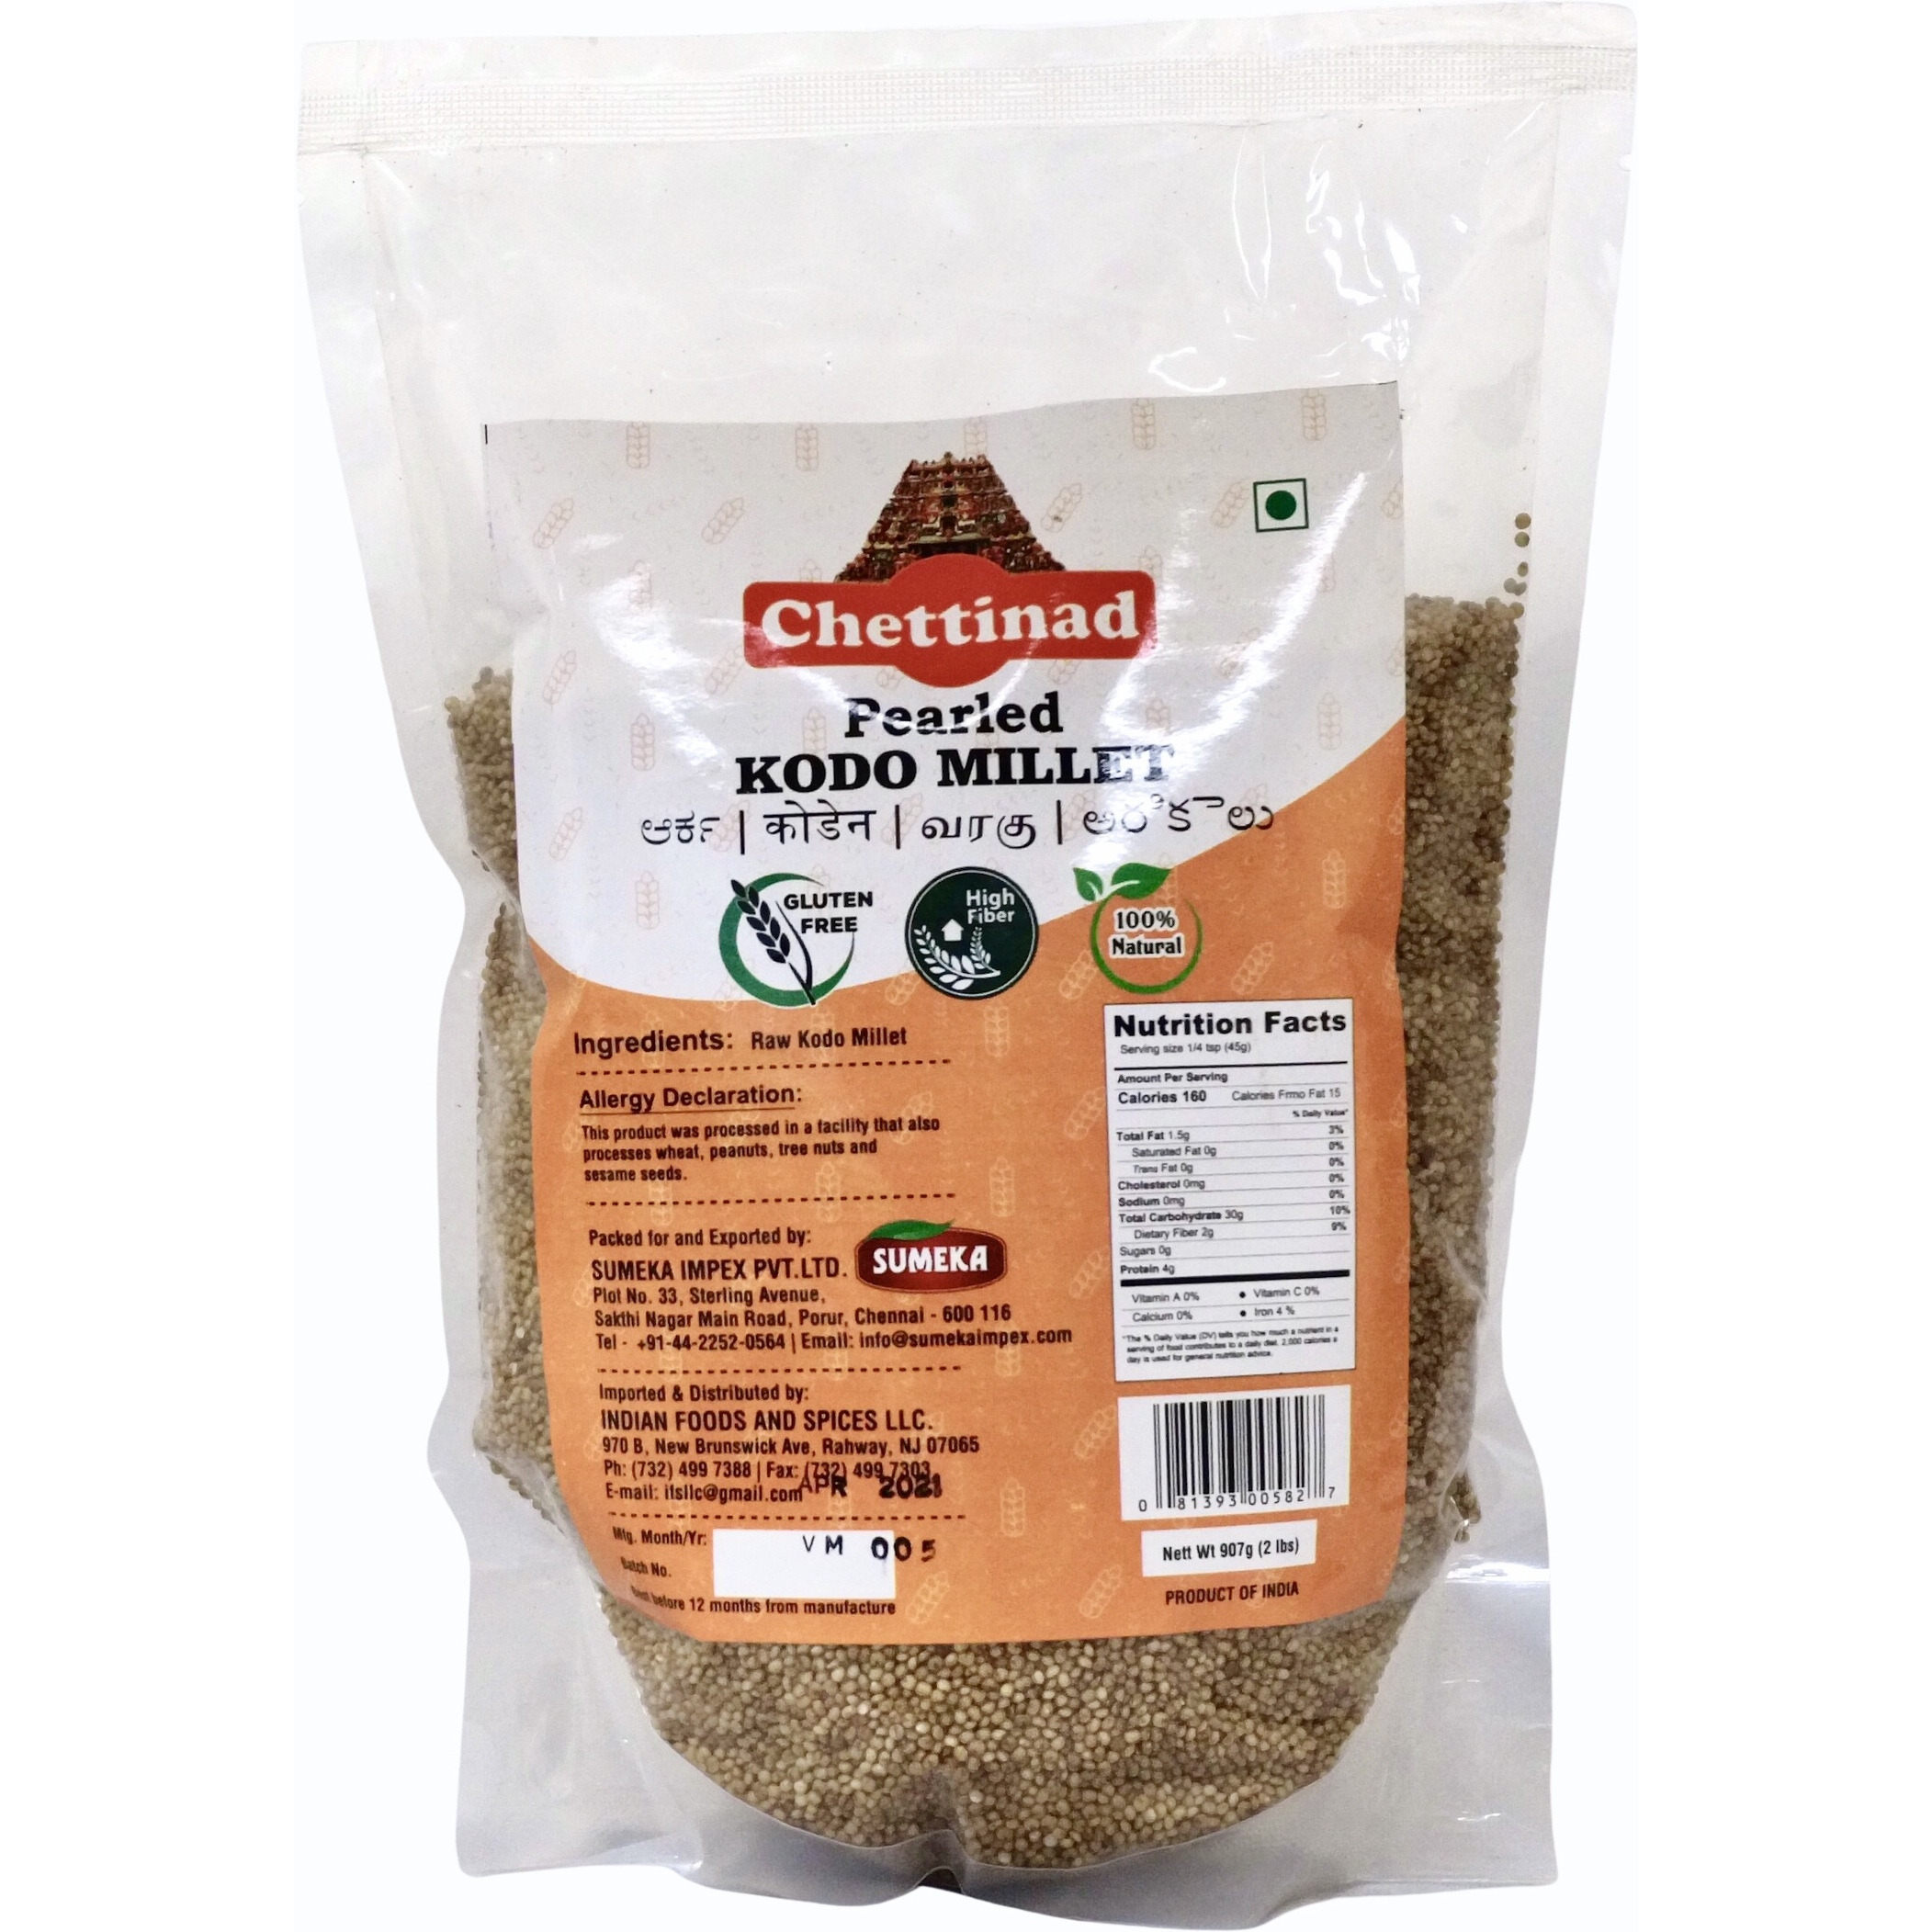 Case of 12 - Chettinad Pearled Raw Kodo Millet - 2 Lb (907 Gm)